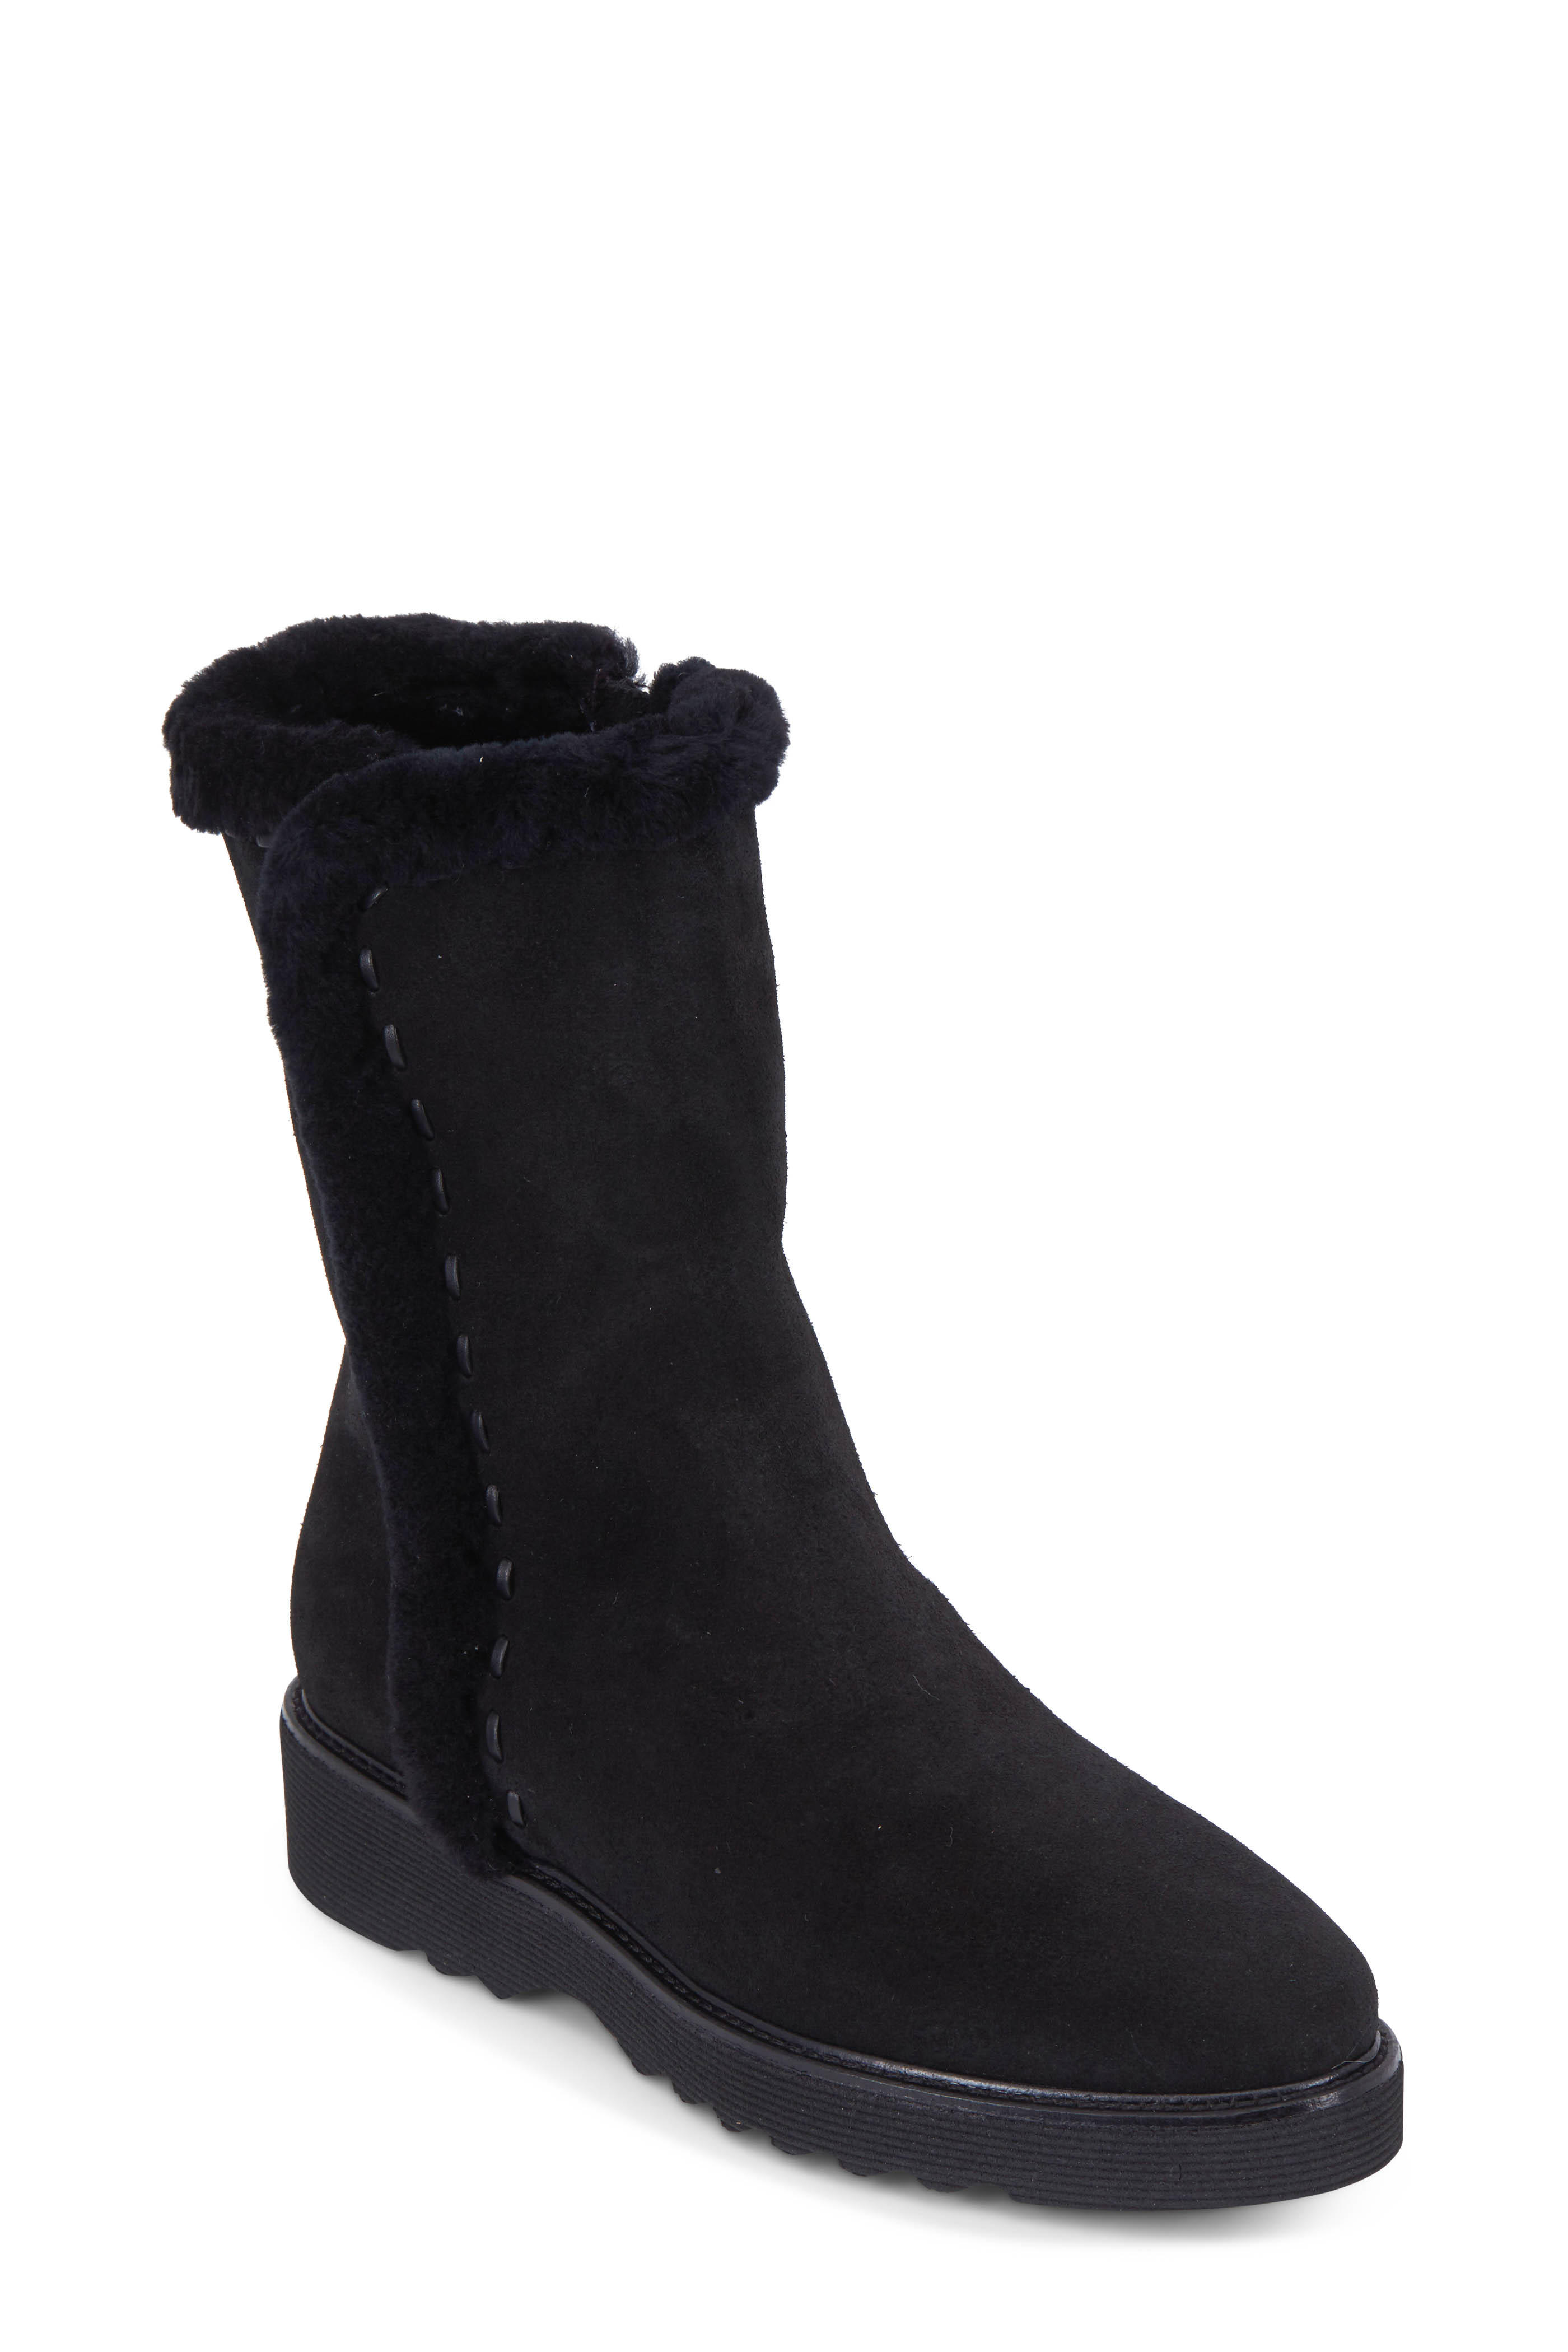 Kalena Black Suede Shearling Lined Boot 